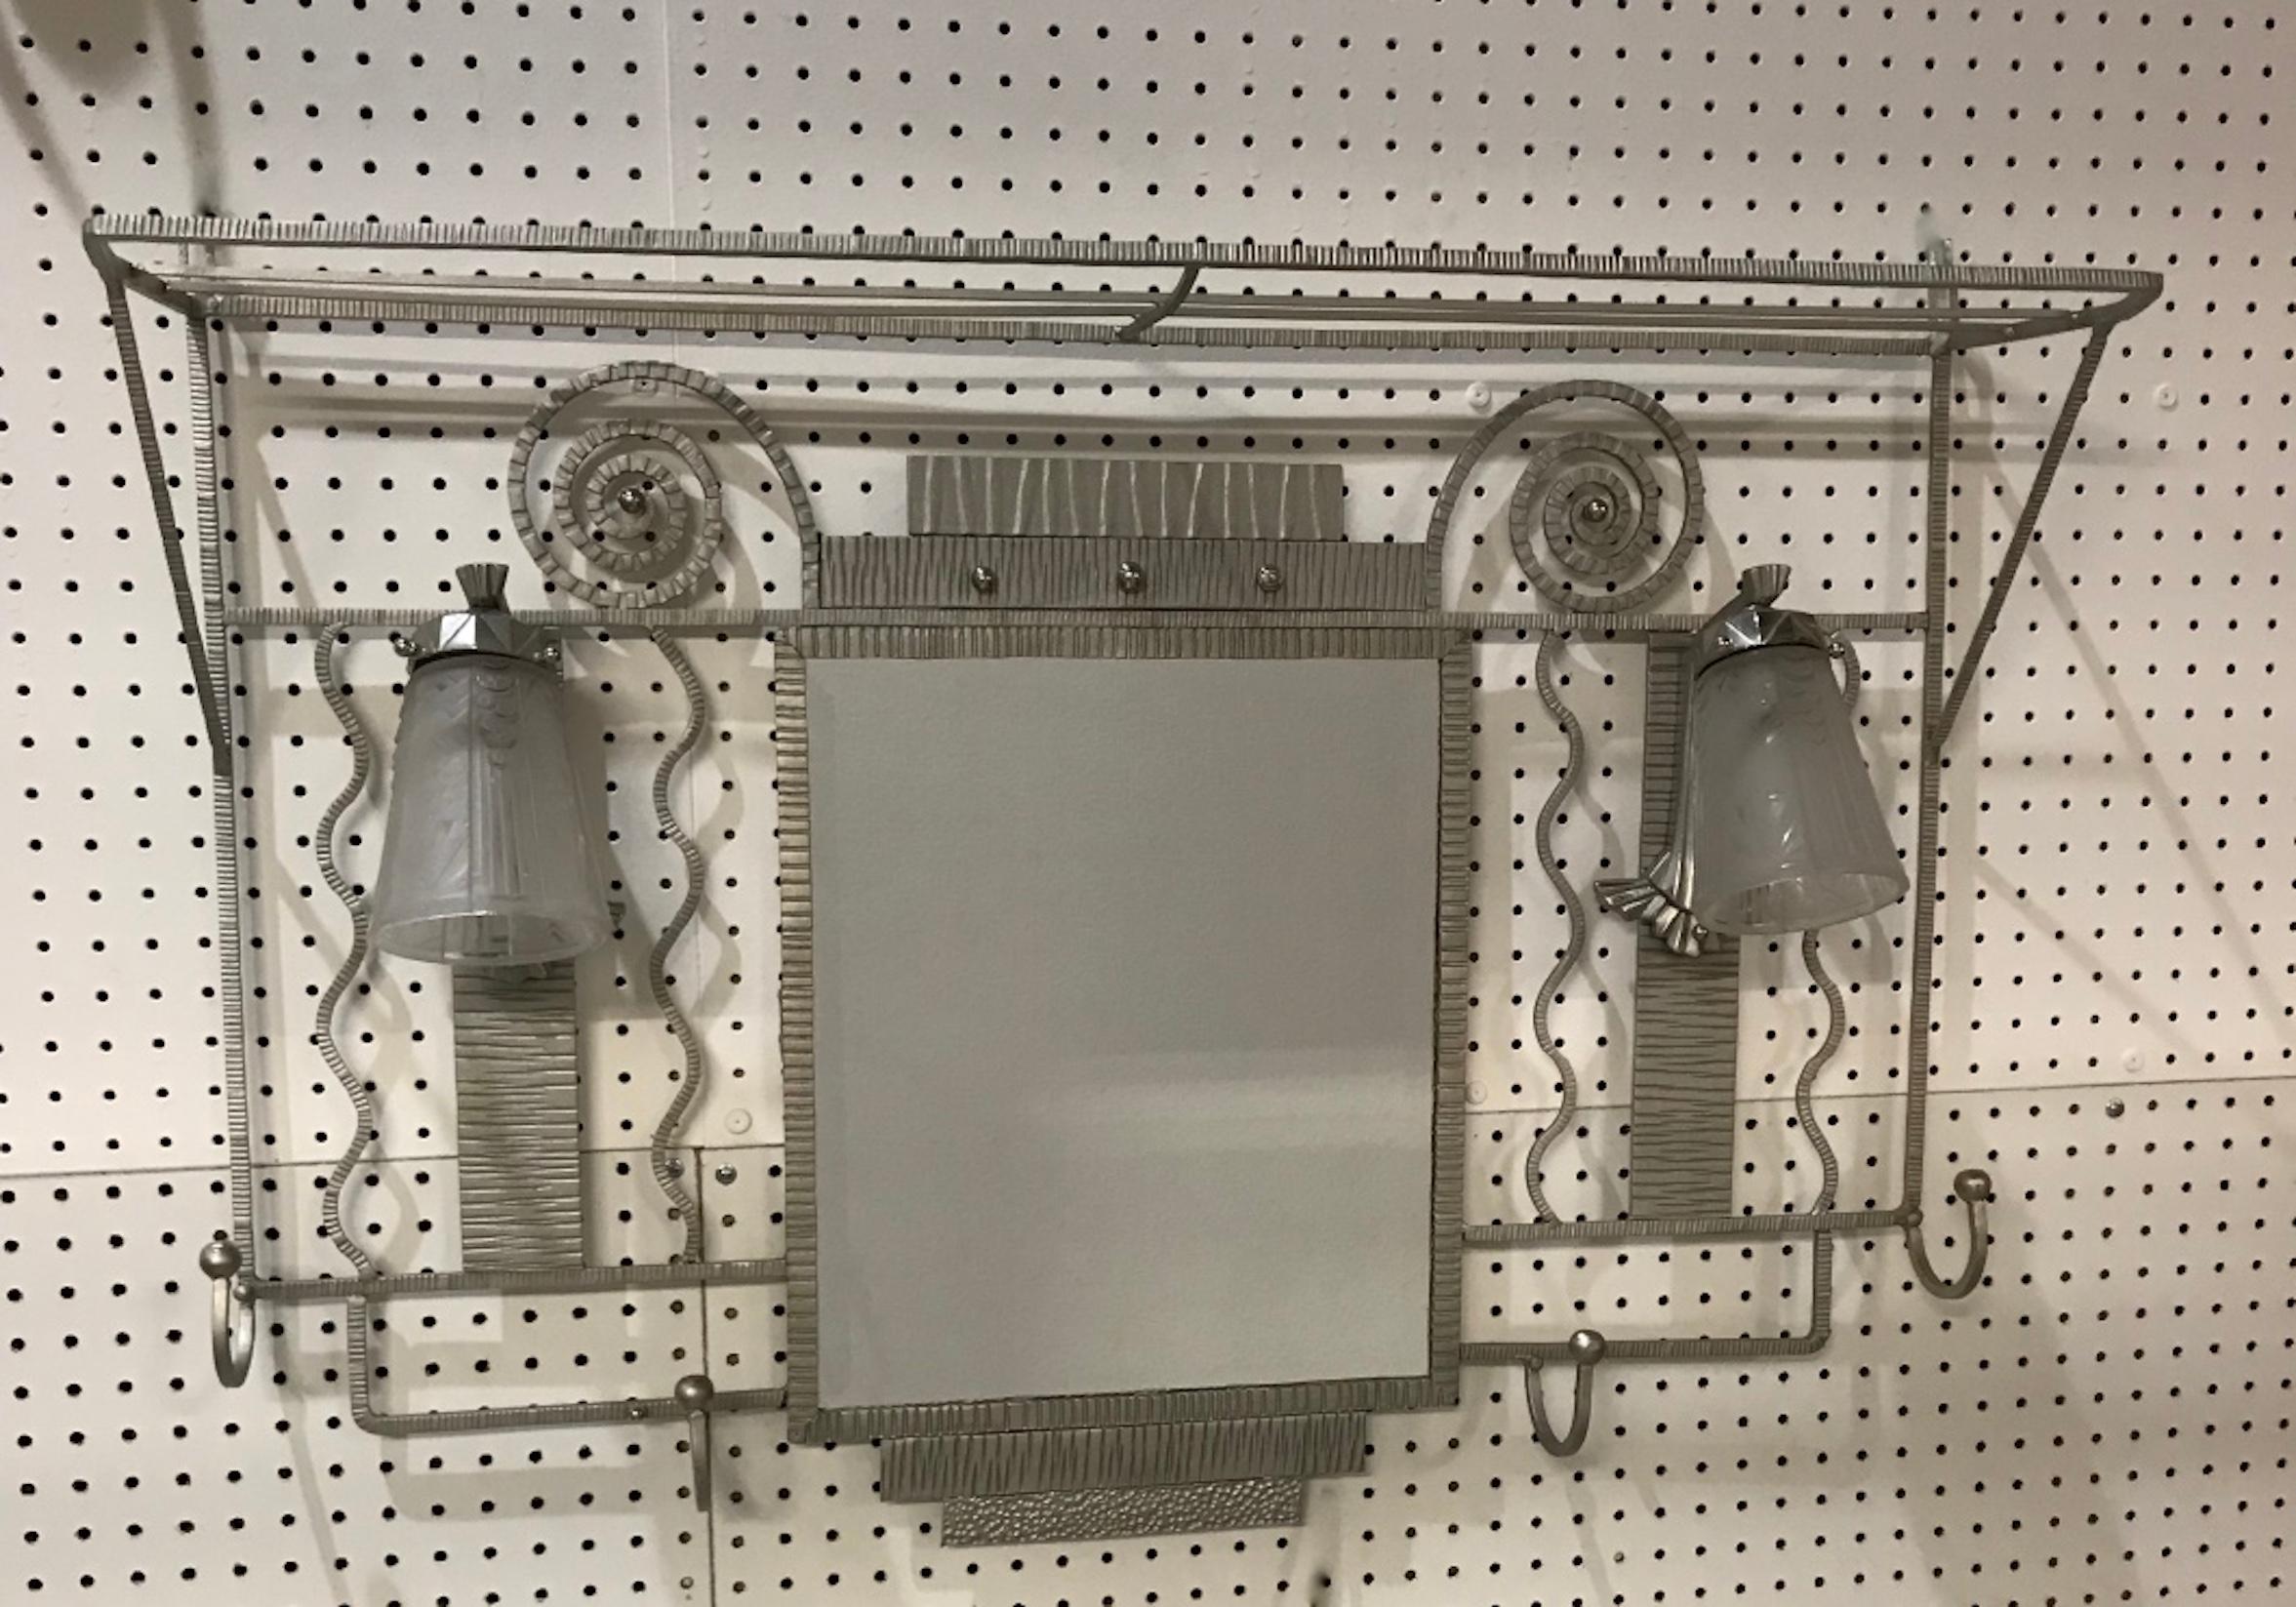 French Art Deco coat rack with pair signed of Muller Frères Luneville sconces. With two clear frosted glass shades having geometric motifs. Held by a polished nickel design frame. Features a central beveled mirror and hat rack with beautiful Deco